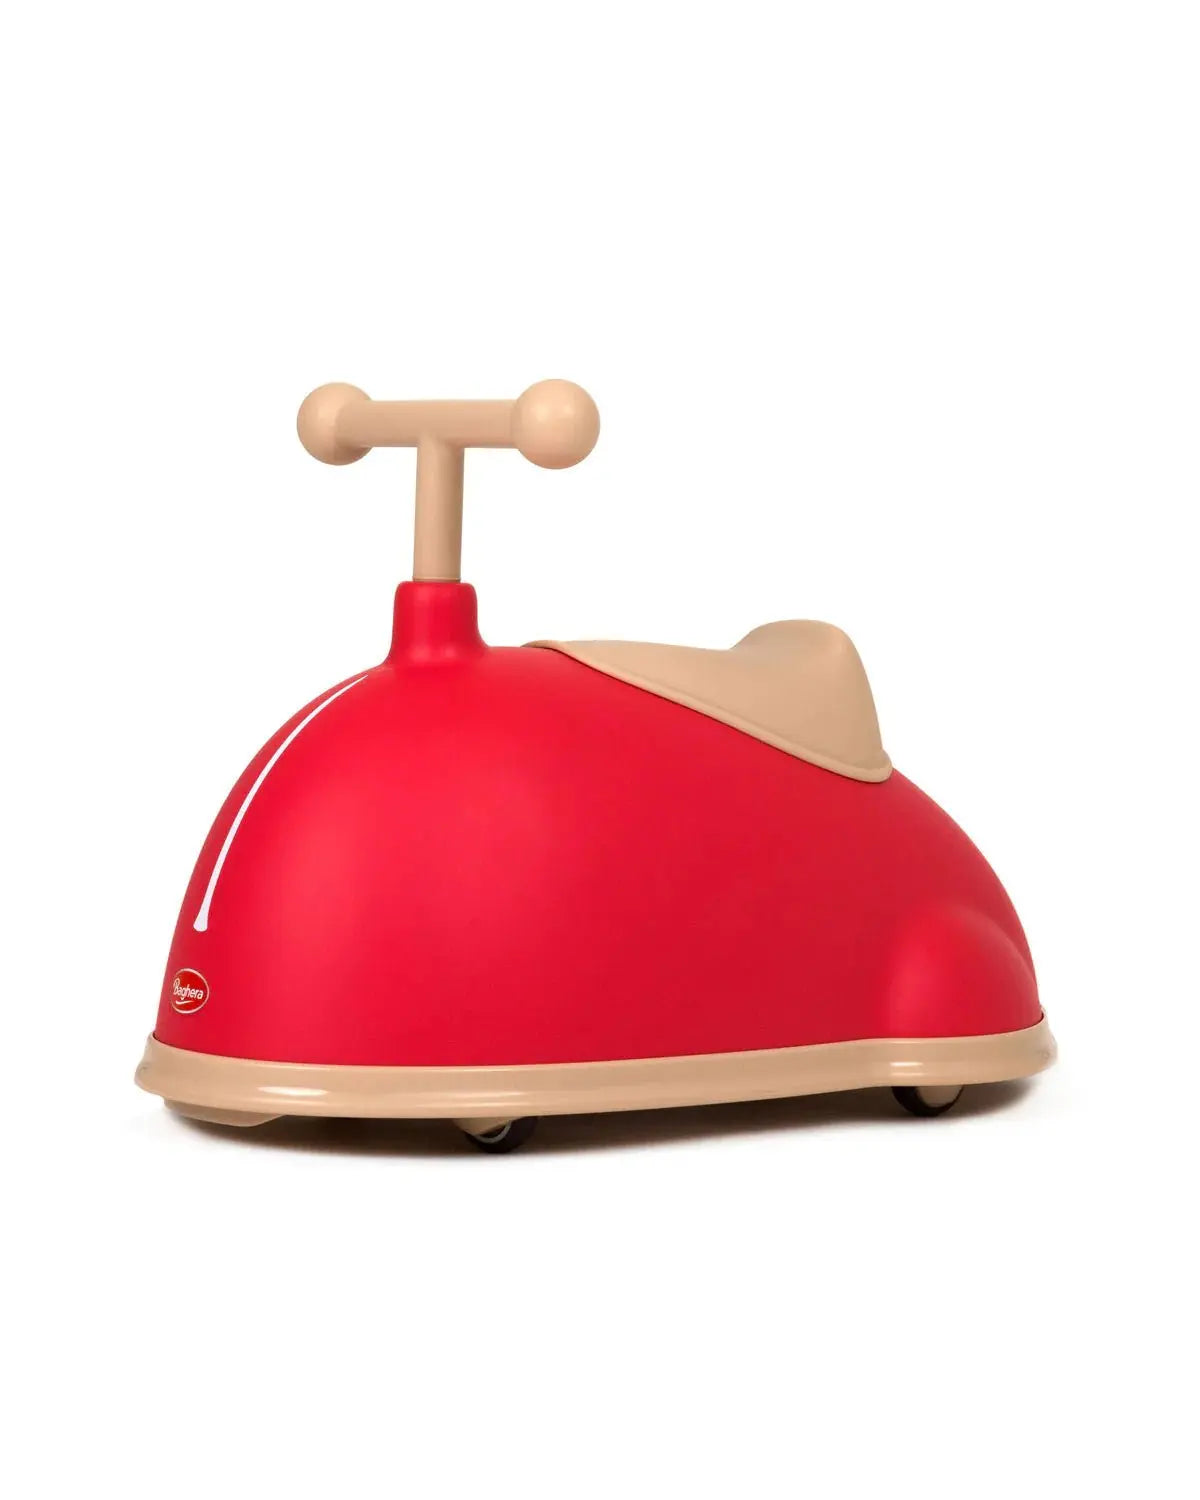 Child's Ride-on Twister, Balance and Motor Skills Development Toy, Fun and Educational  Baghera Red  